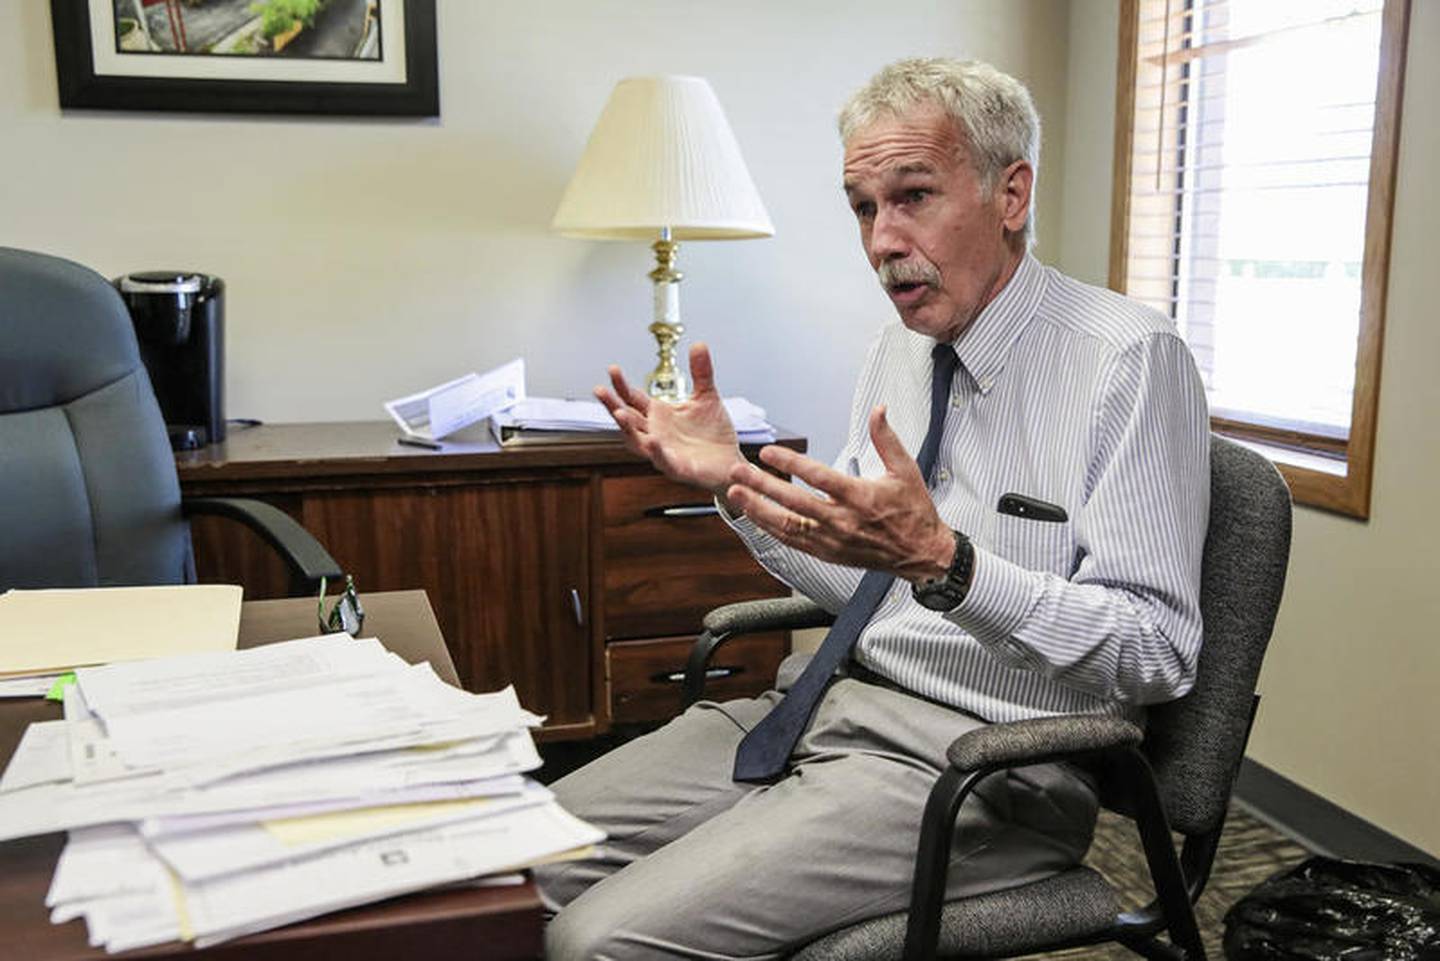 Paul Lauridsen, the executive director of Stepping Stones, speaks with the Herald-News on Tuesday, June 25, 2019, at his office in Joliet, Ill.